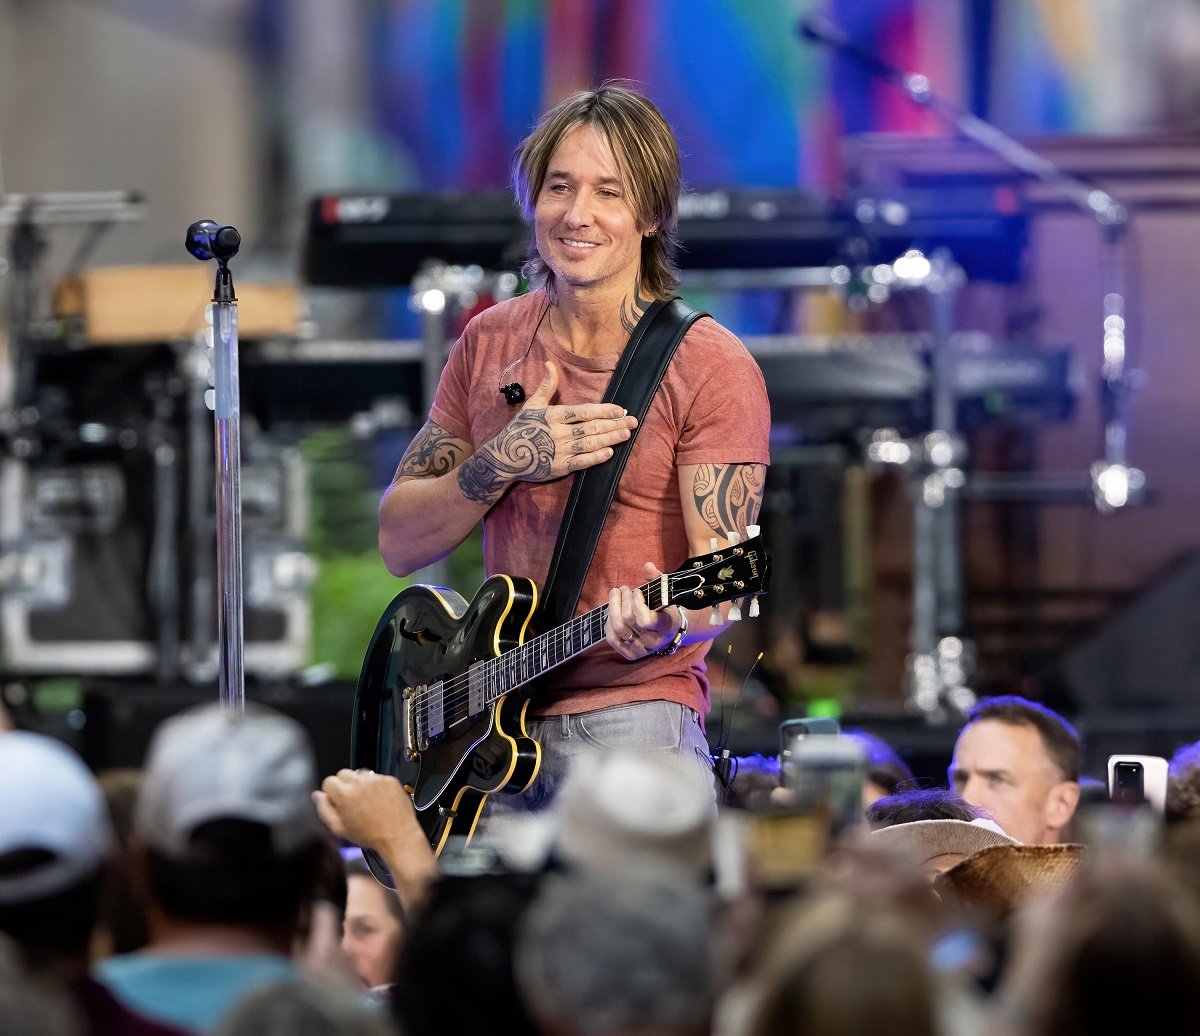 Keith Urban Says the Audience Has Changed on His ‘The Speed of Now’ World Tour